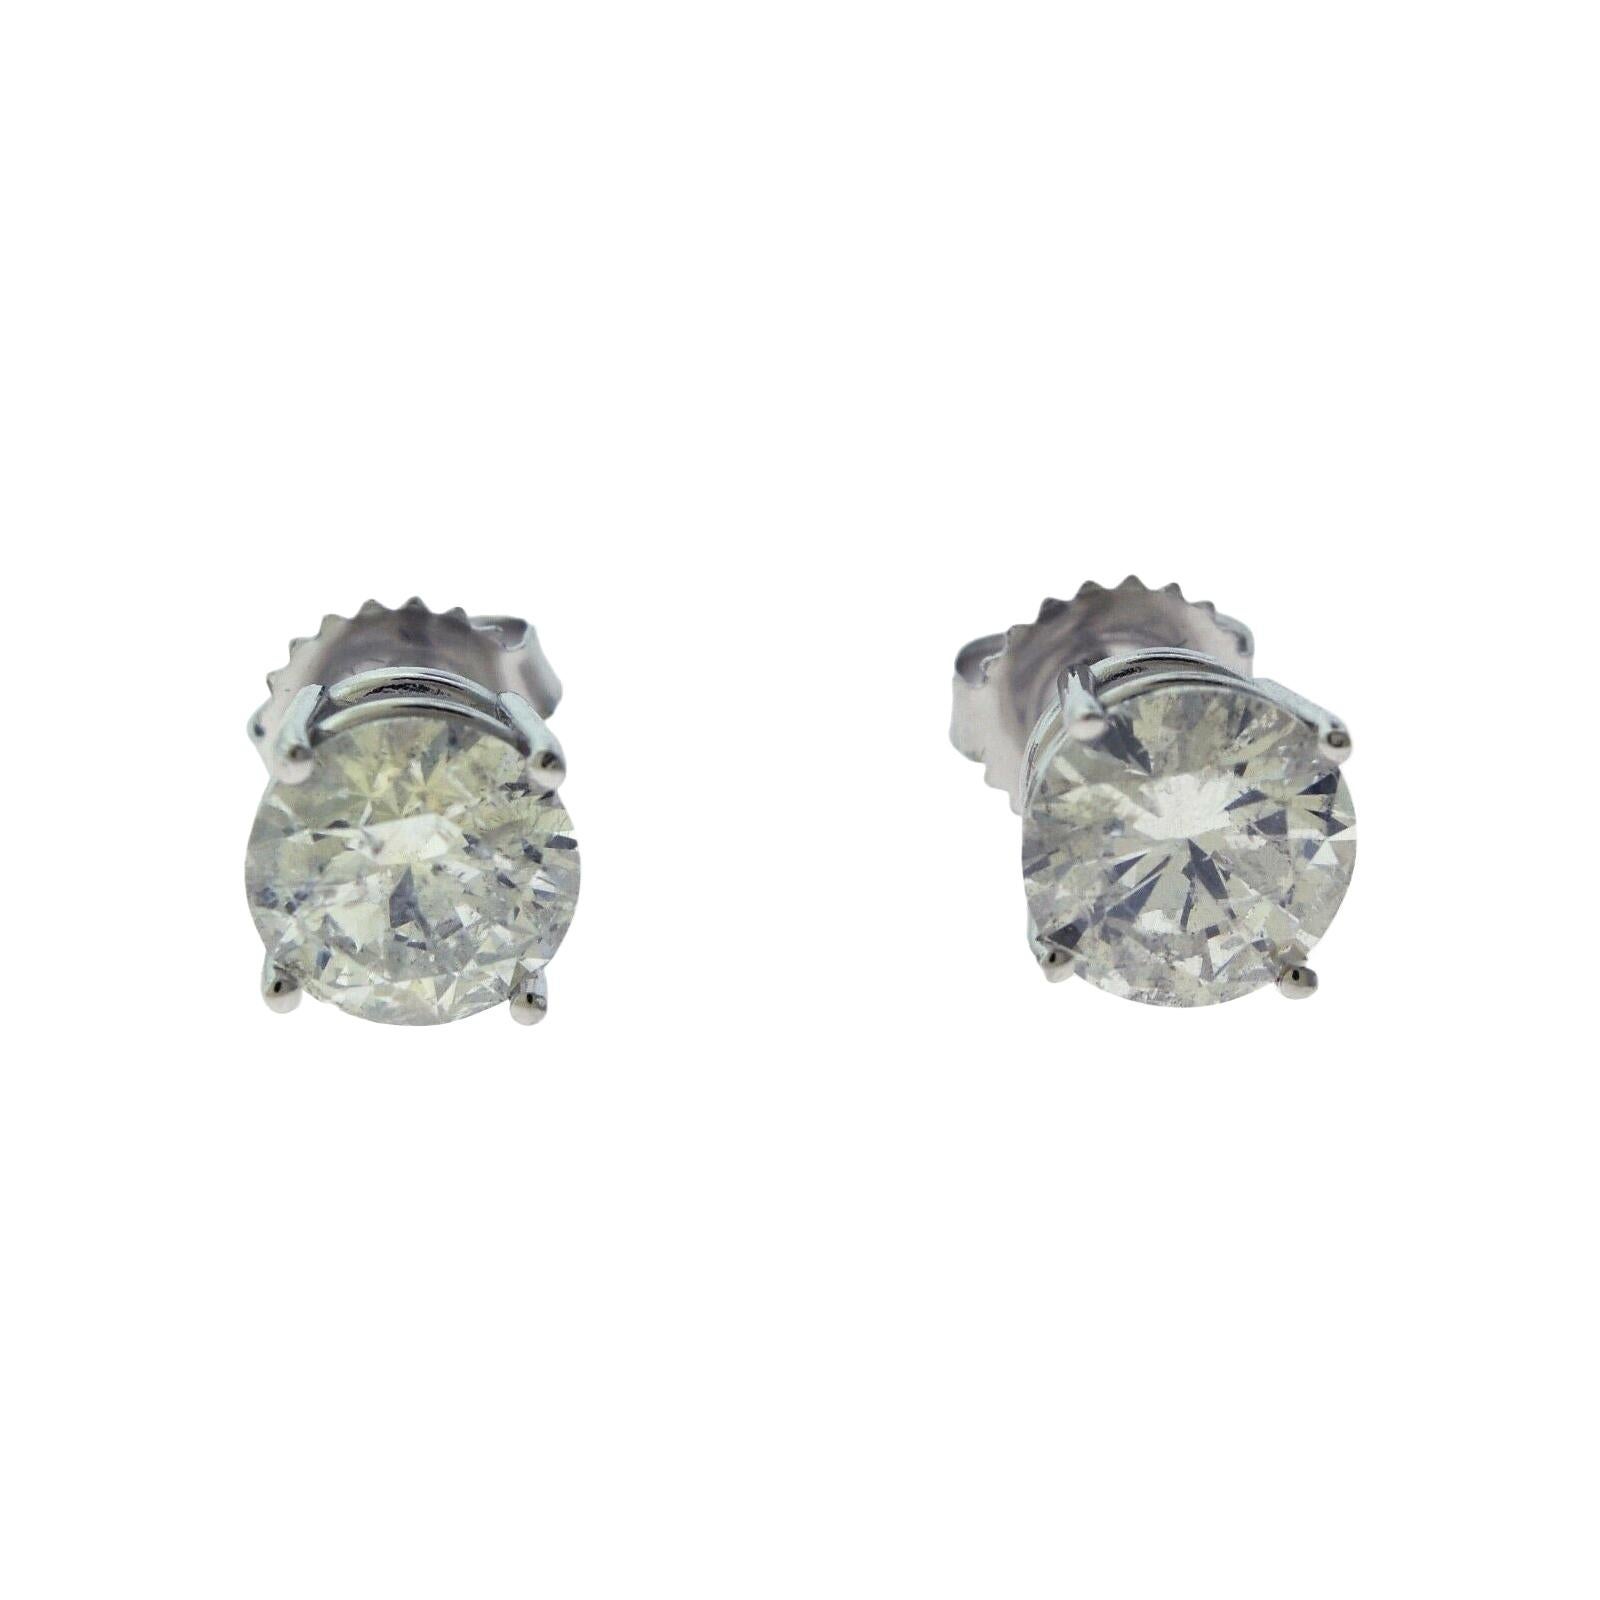 3.11 Total Carat Weight Brilliant Cut Diamond Stud Earrings in White Gold